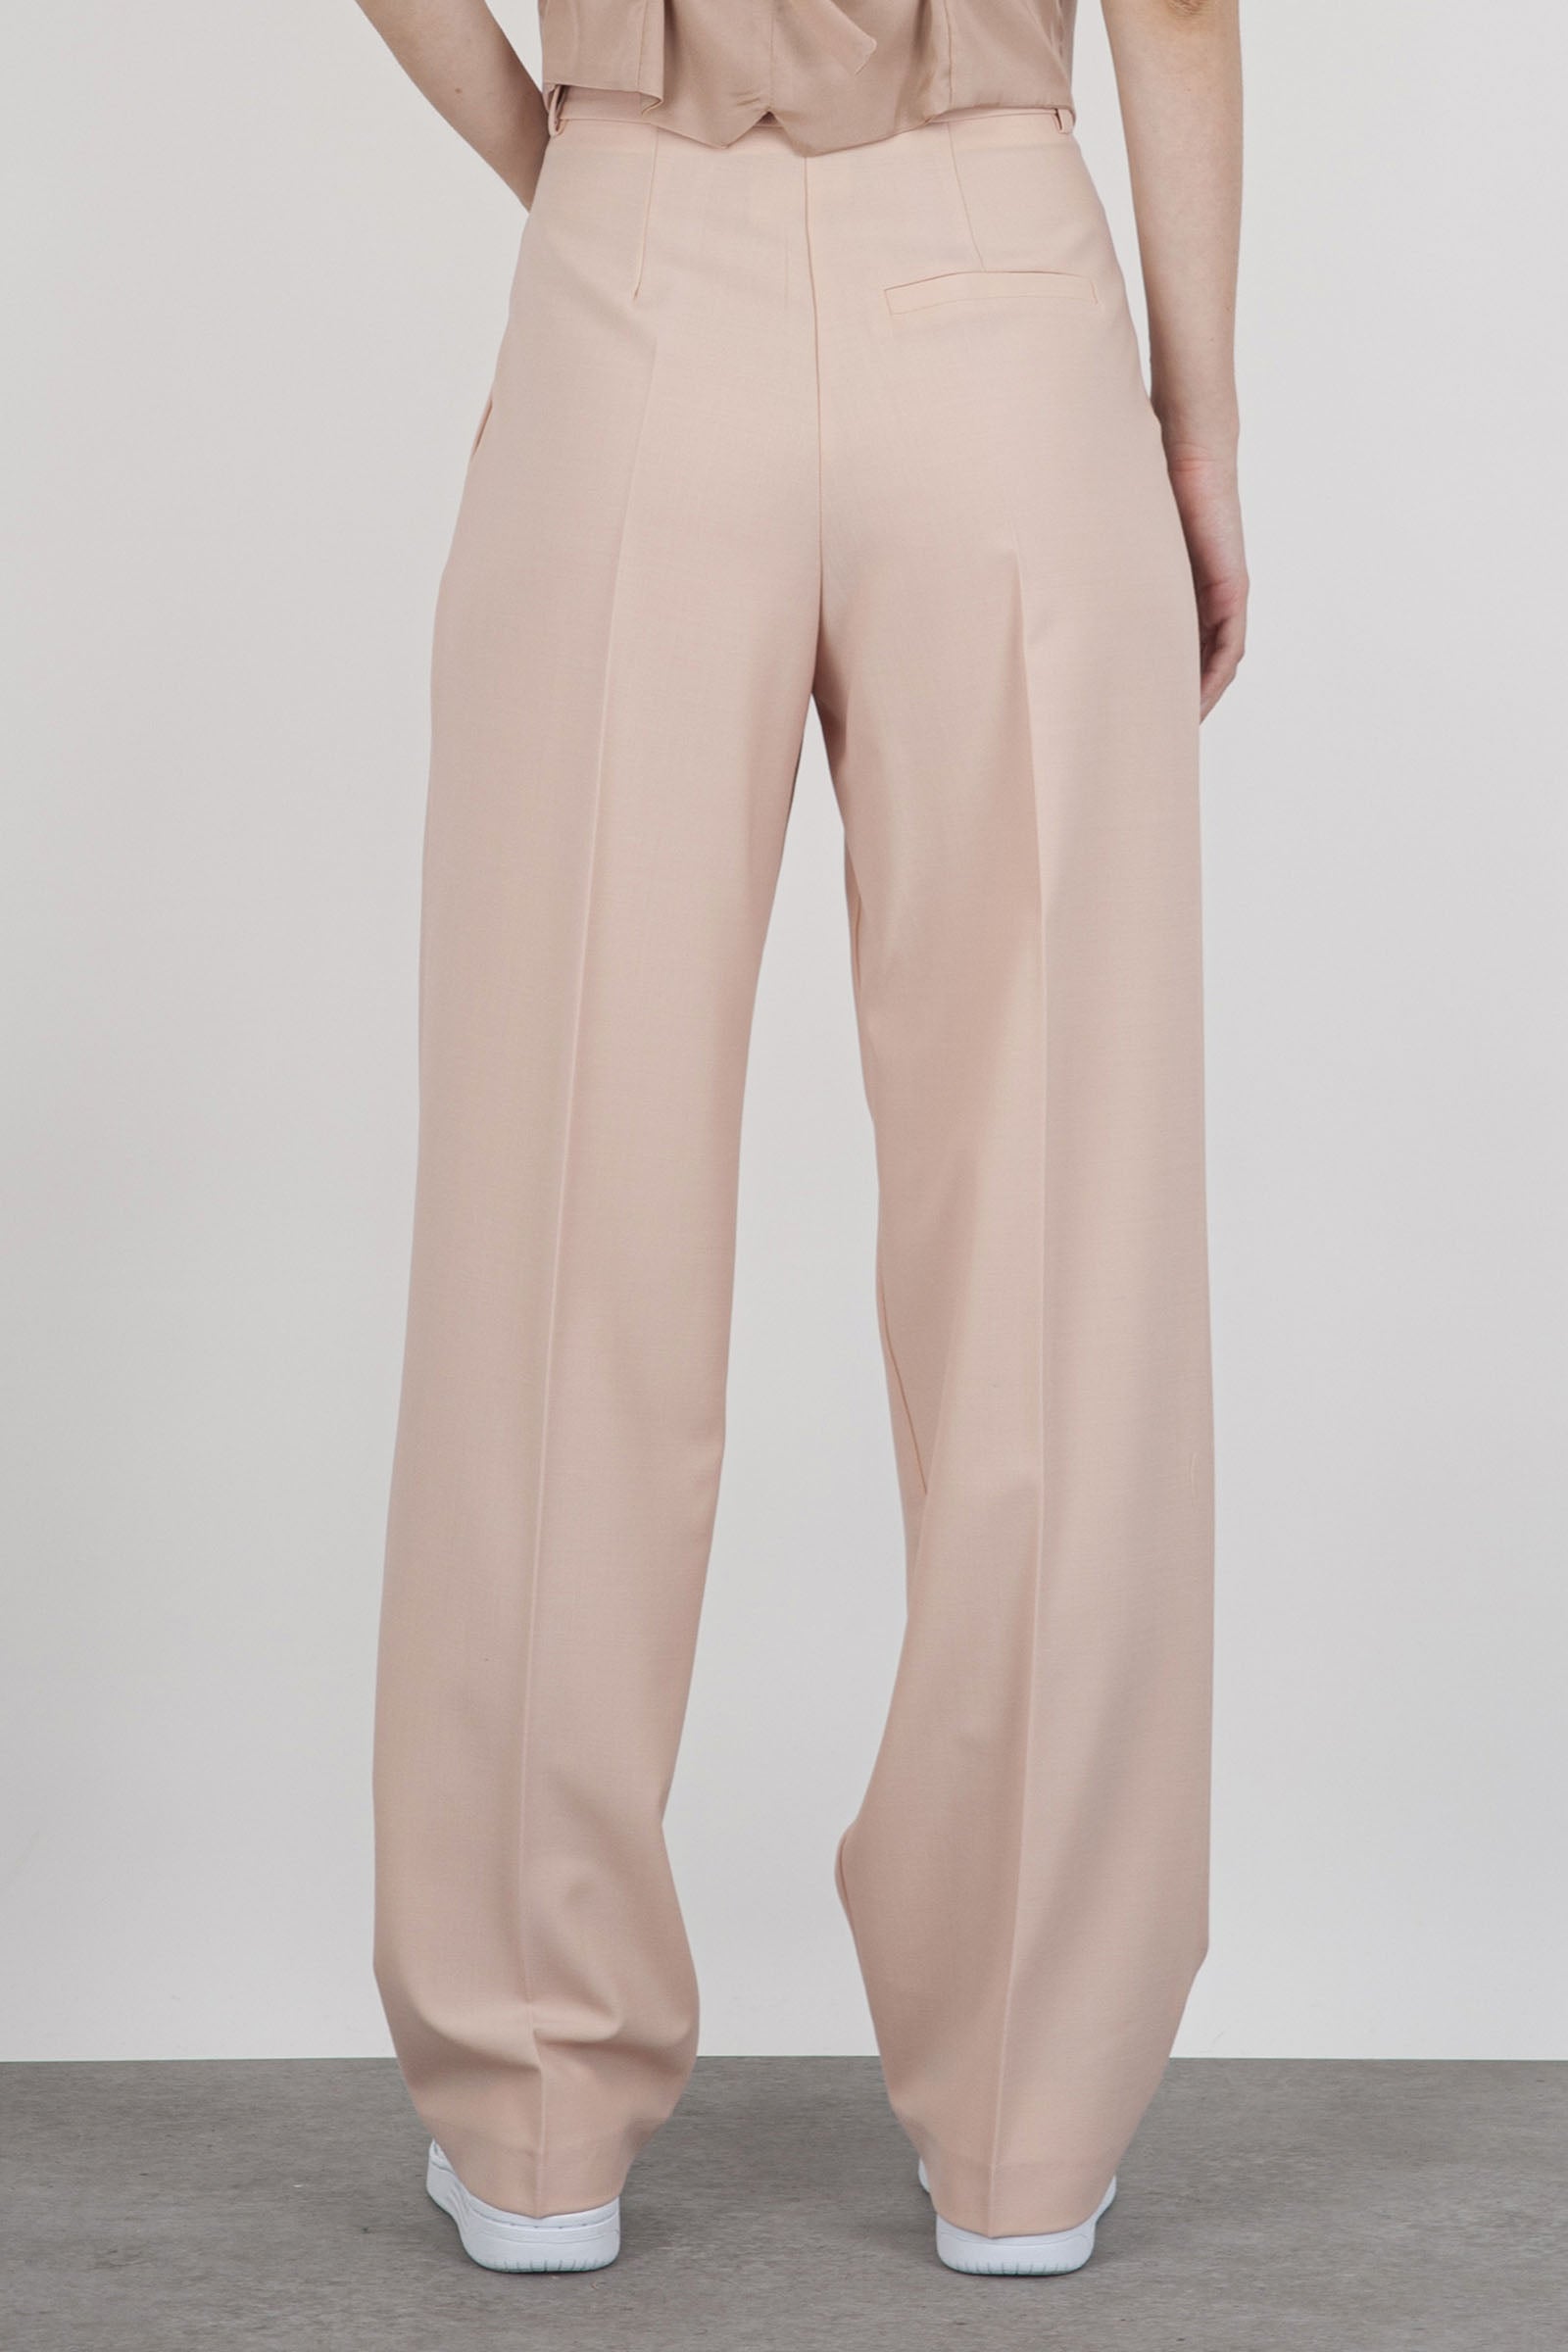 Semicouture Jody Synthetic Powder Pink Trousers - 5